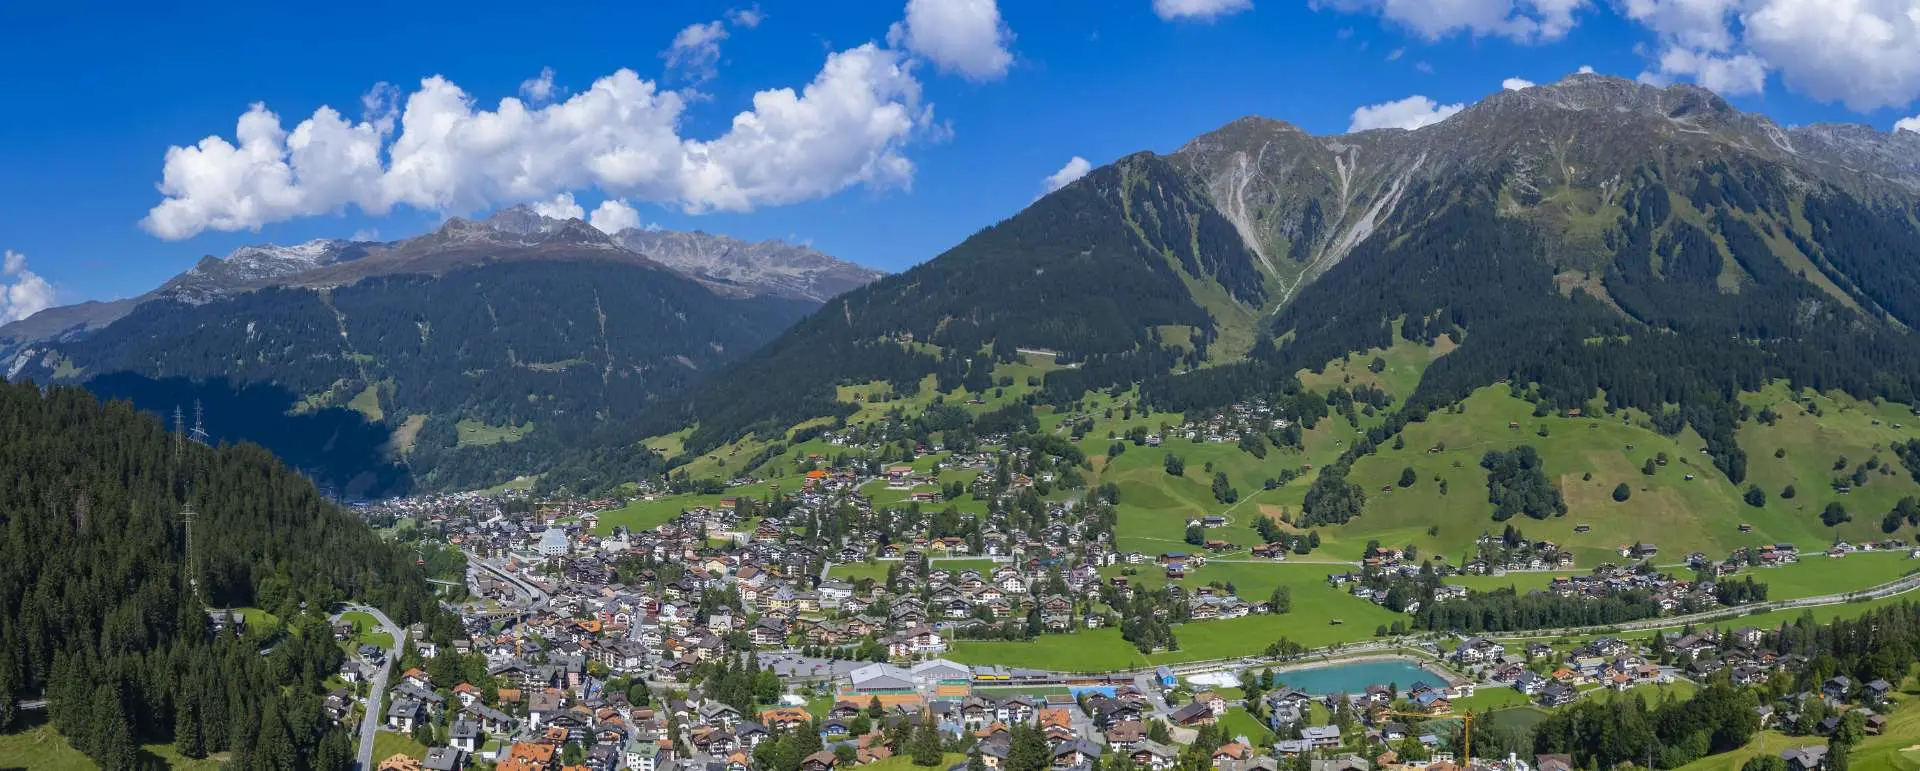 Klosters-Serneus - the destination for wellness